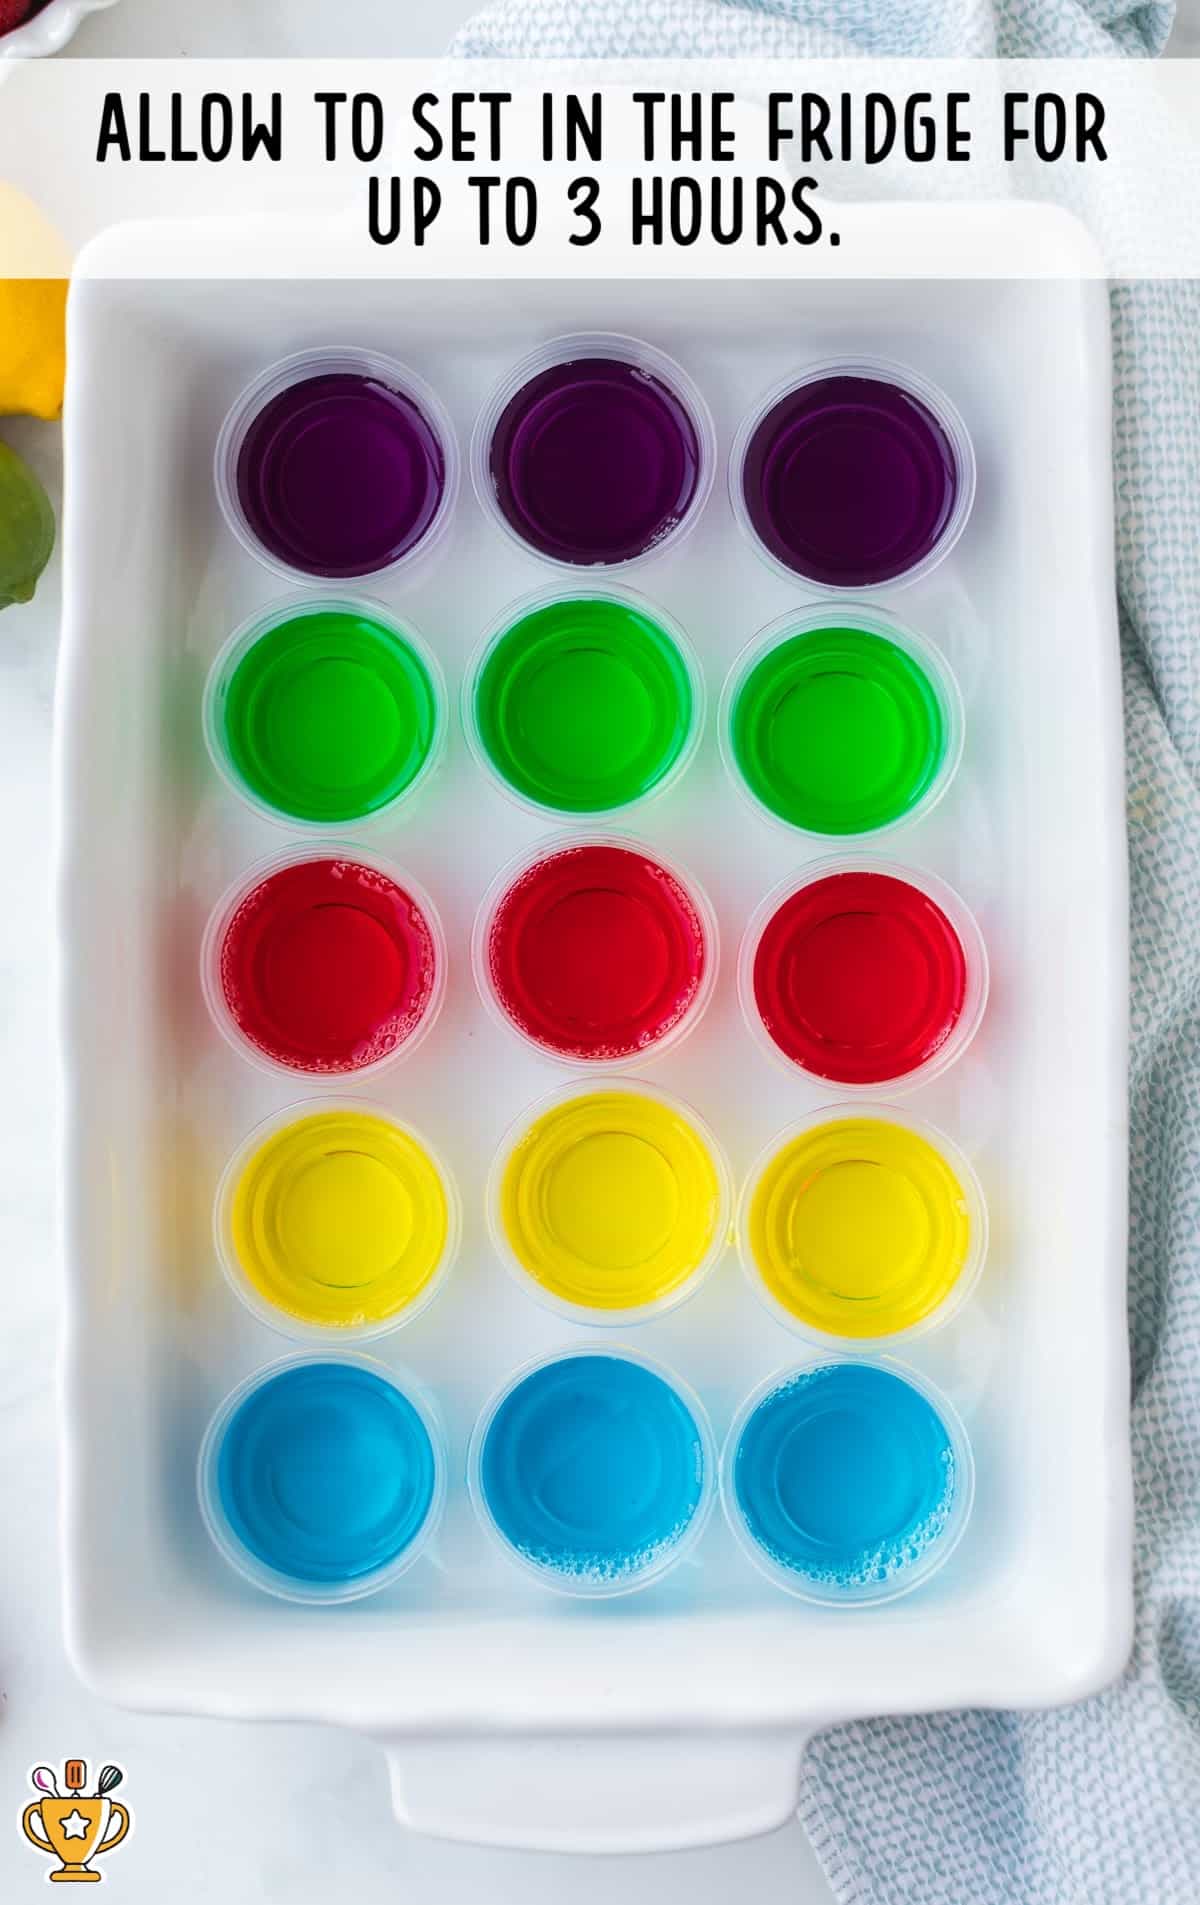 2 ounce vodka jello shots lined up by color